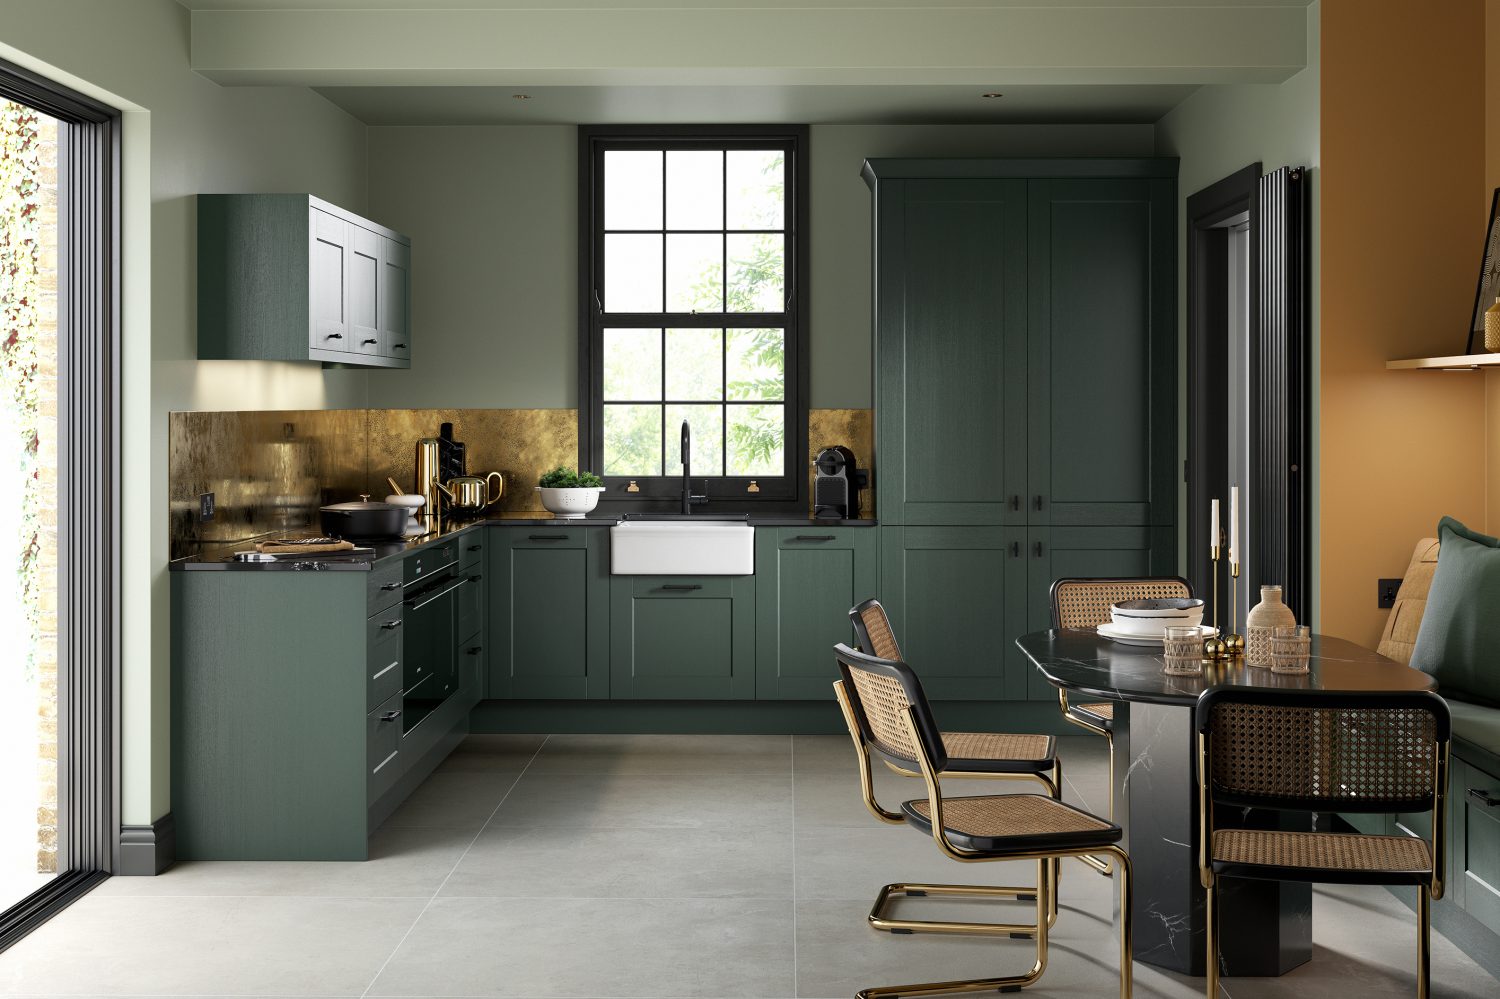 Kendal shaker Heritage Green kitchen made by The Kitchen Depot with dining area